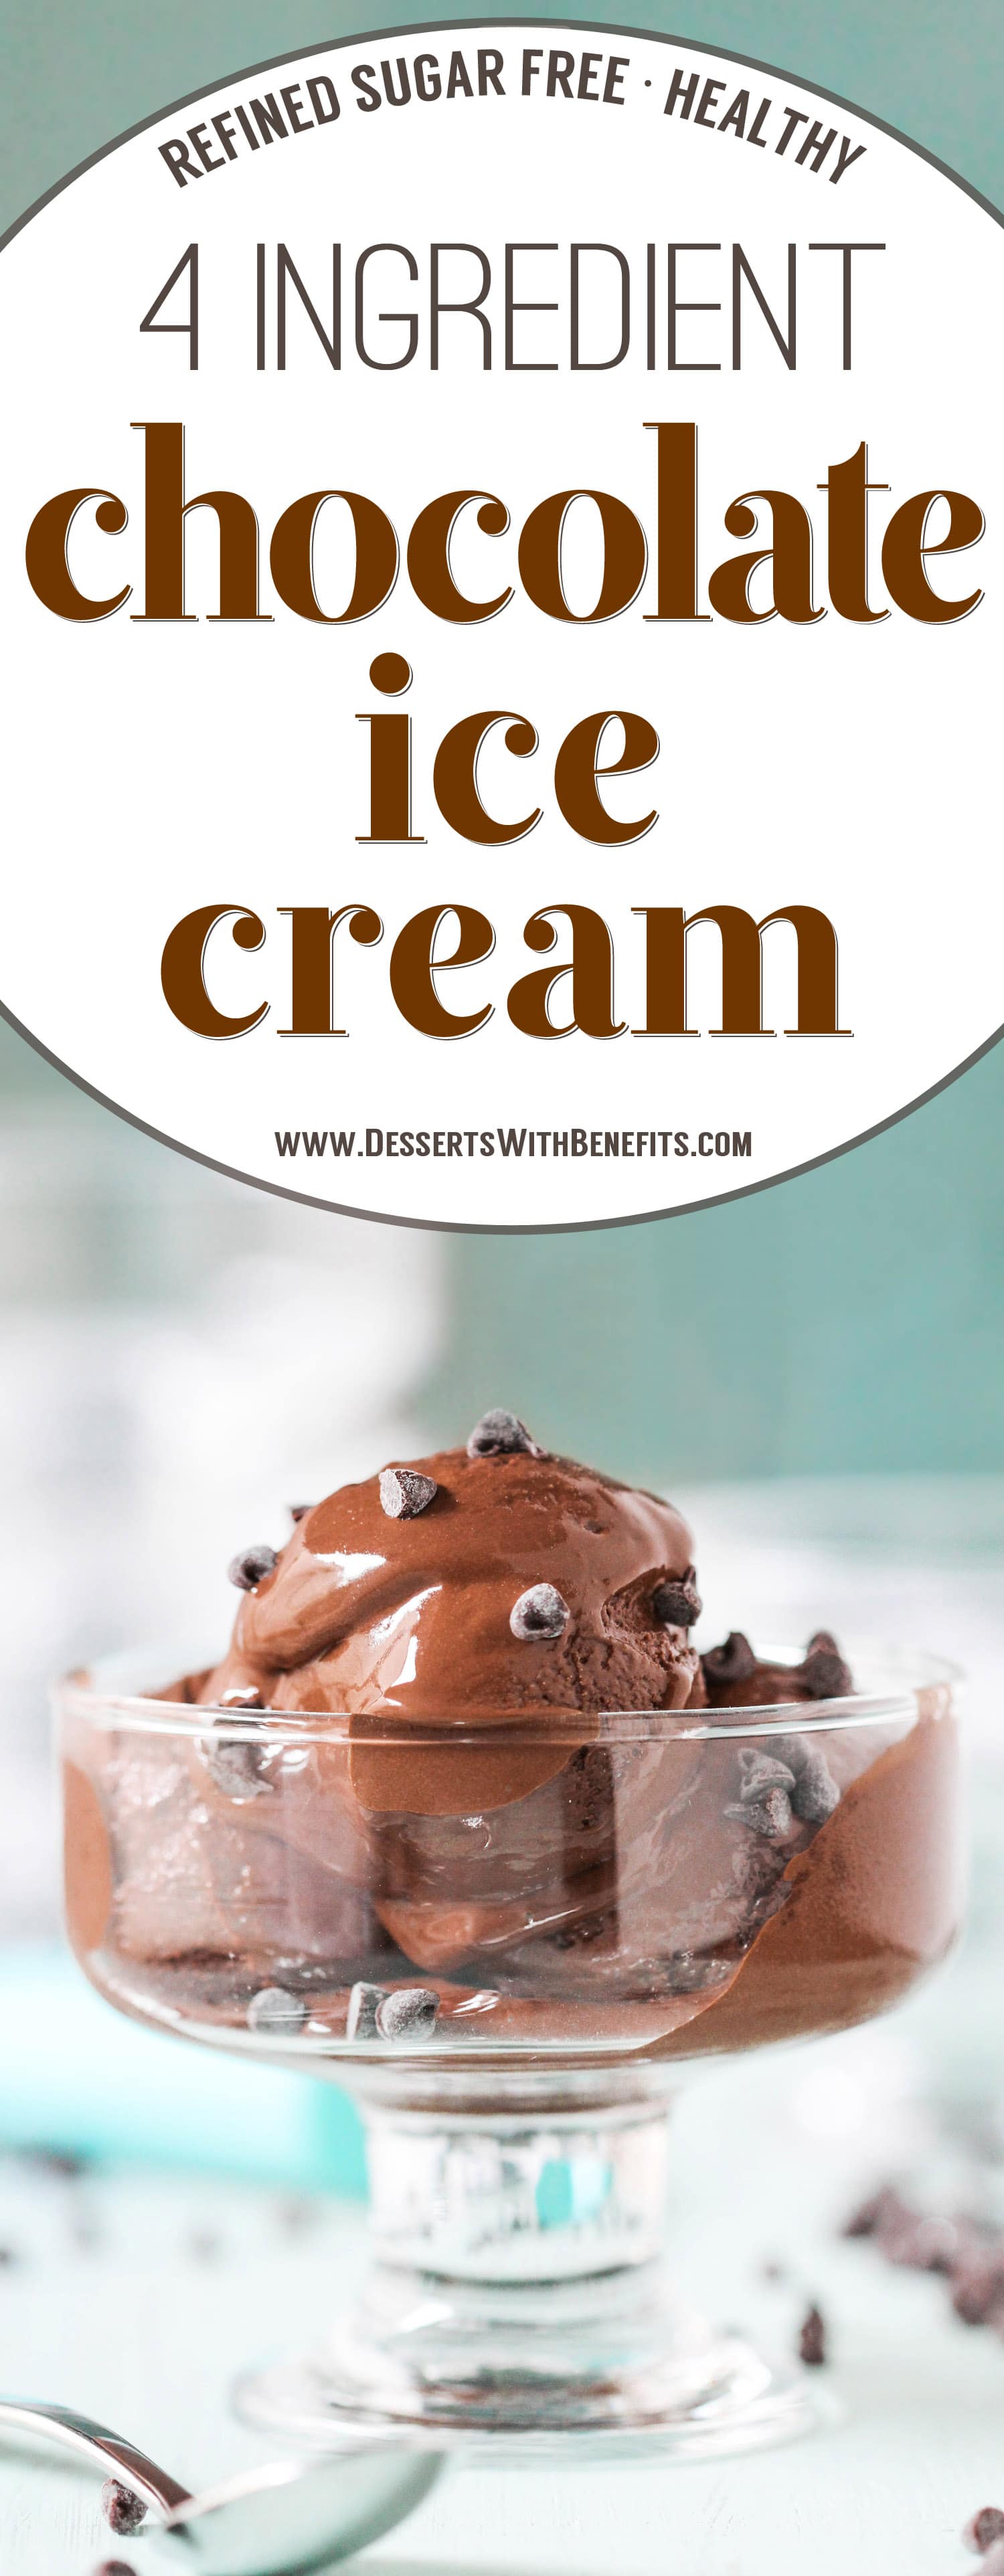 This 4-ingredient No-Churn Chocolate Fudge Ice Cream is ultra creamy, incredibly rich, and perfectly sweet. Made in a blender too, so no ice cream maker required! It's refined sugar free, packed with protein, fiber, and healthy fats. This is ice cream at its best without the sugar, heavy cream, and eggs!